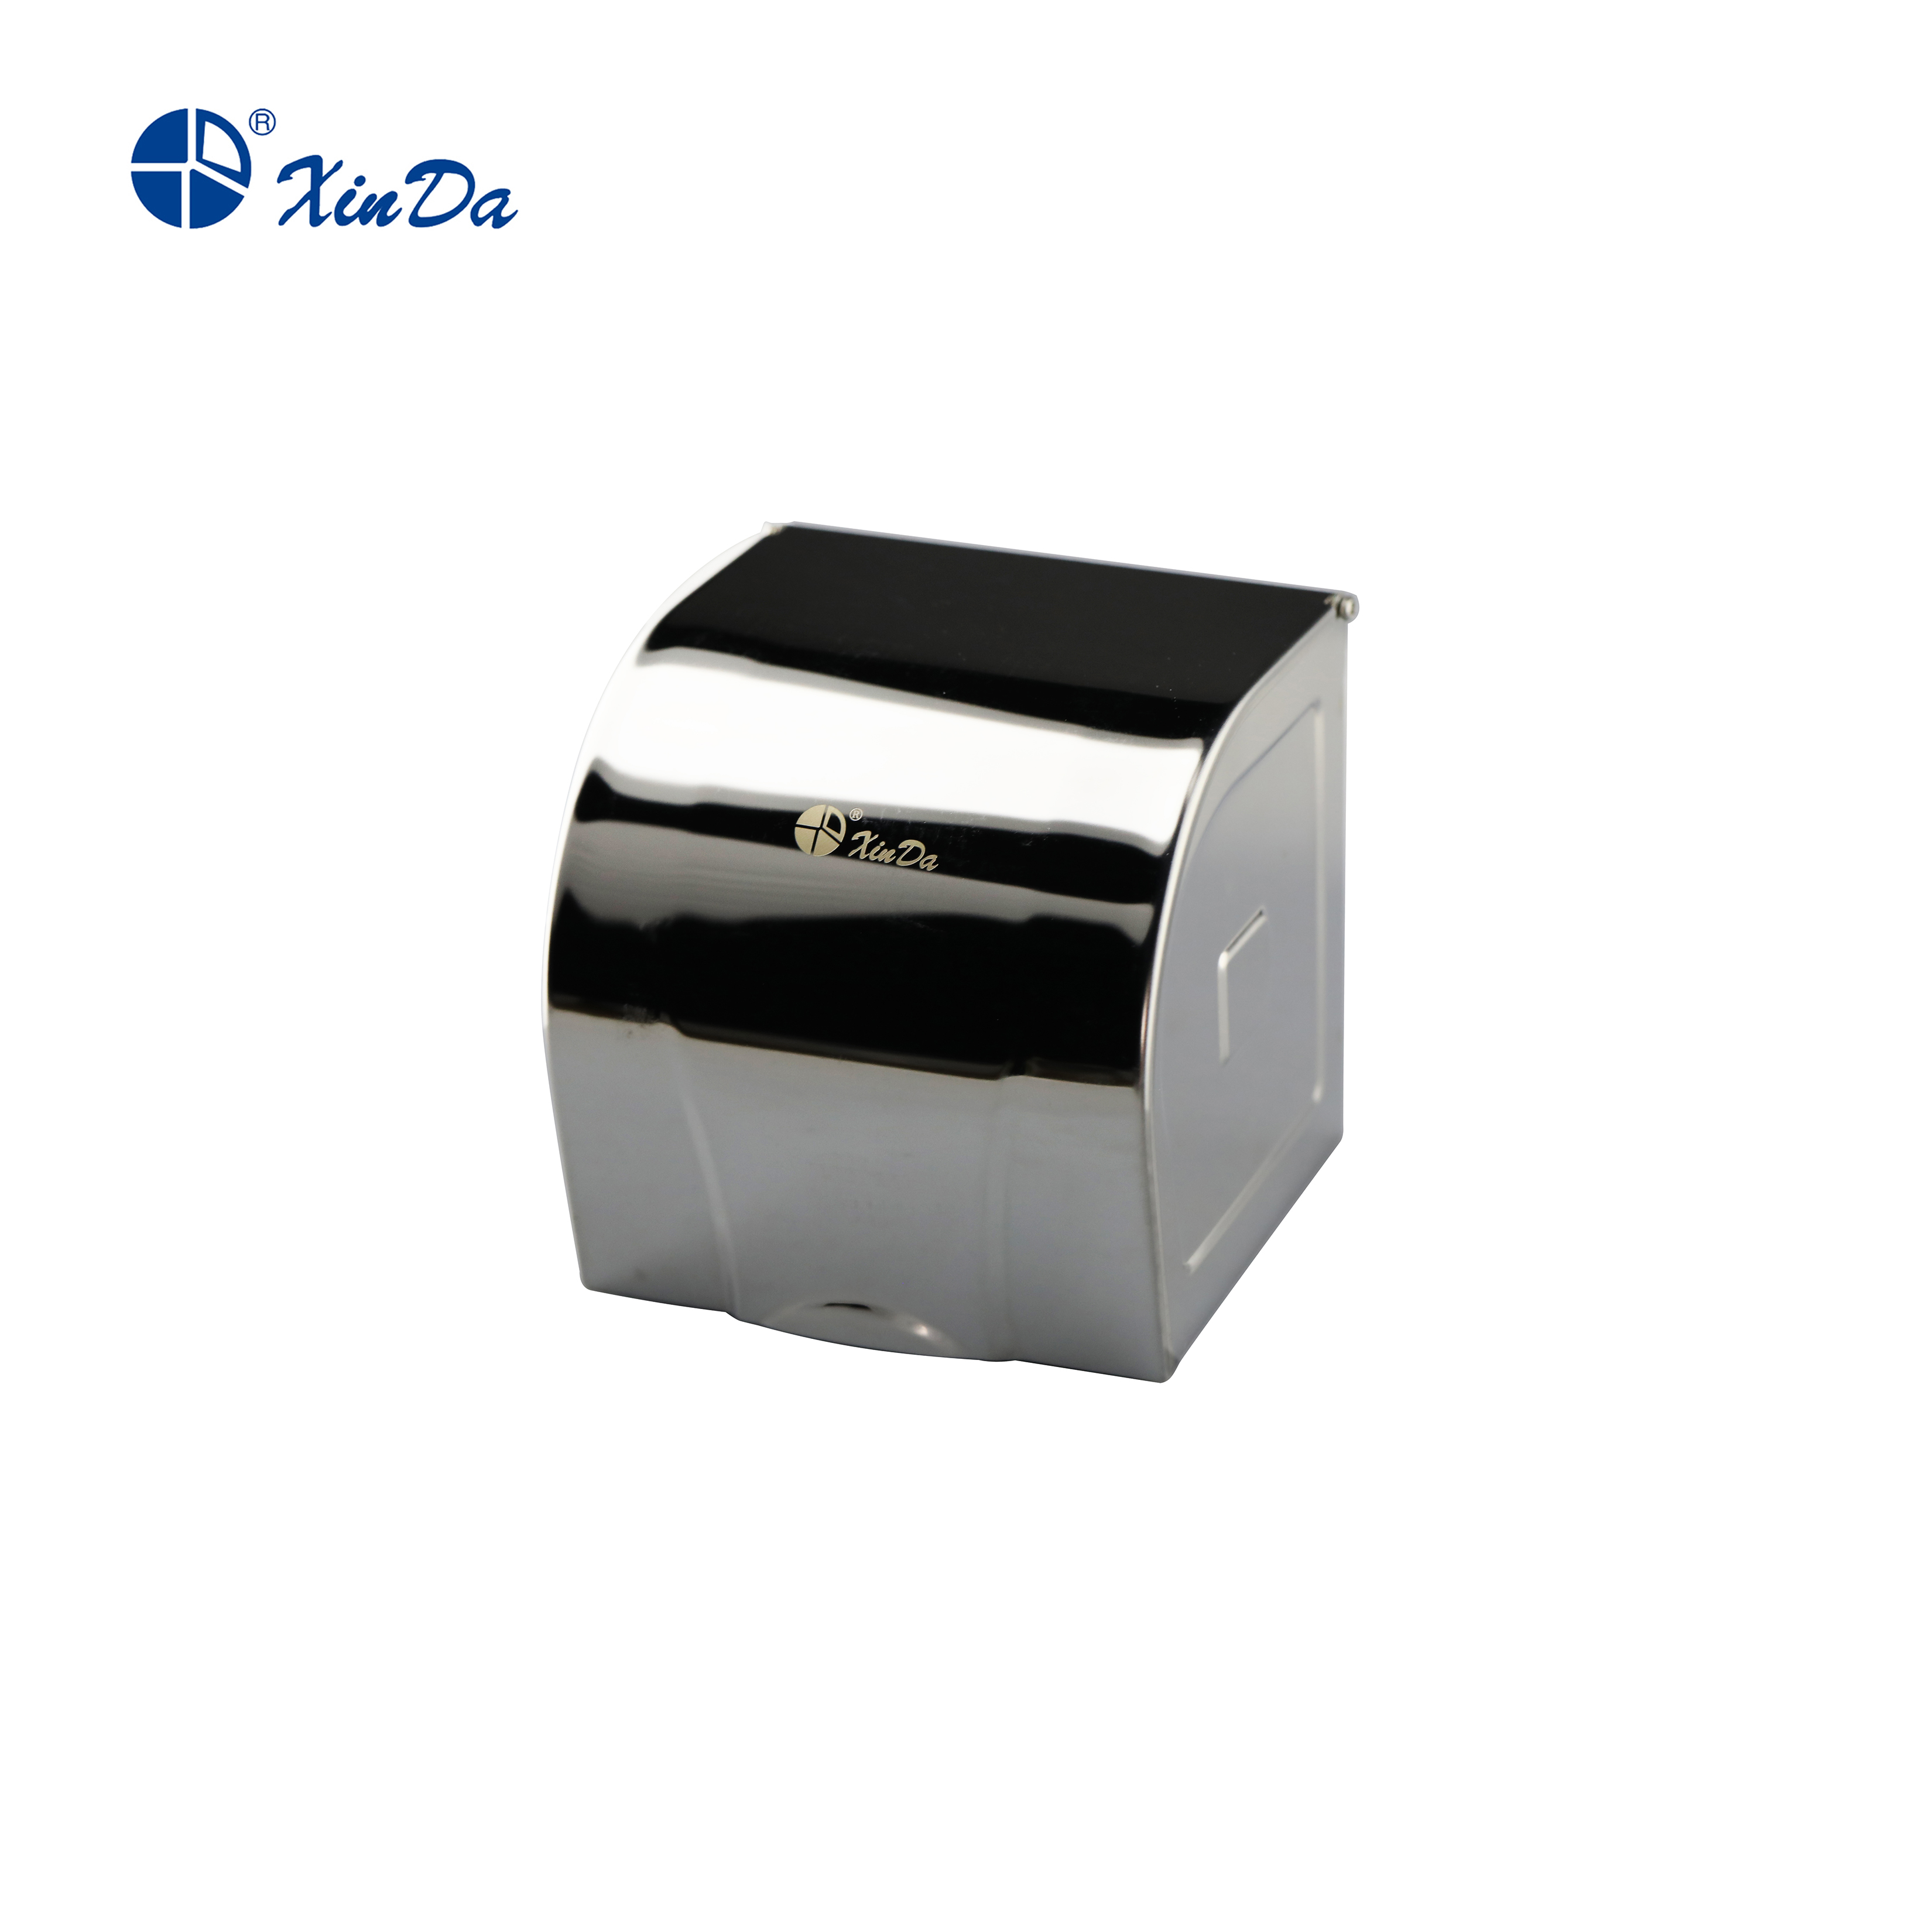 Wall-mounted Stainless Steel High-capacity Roll Holder